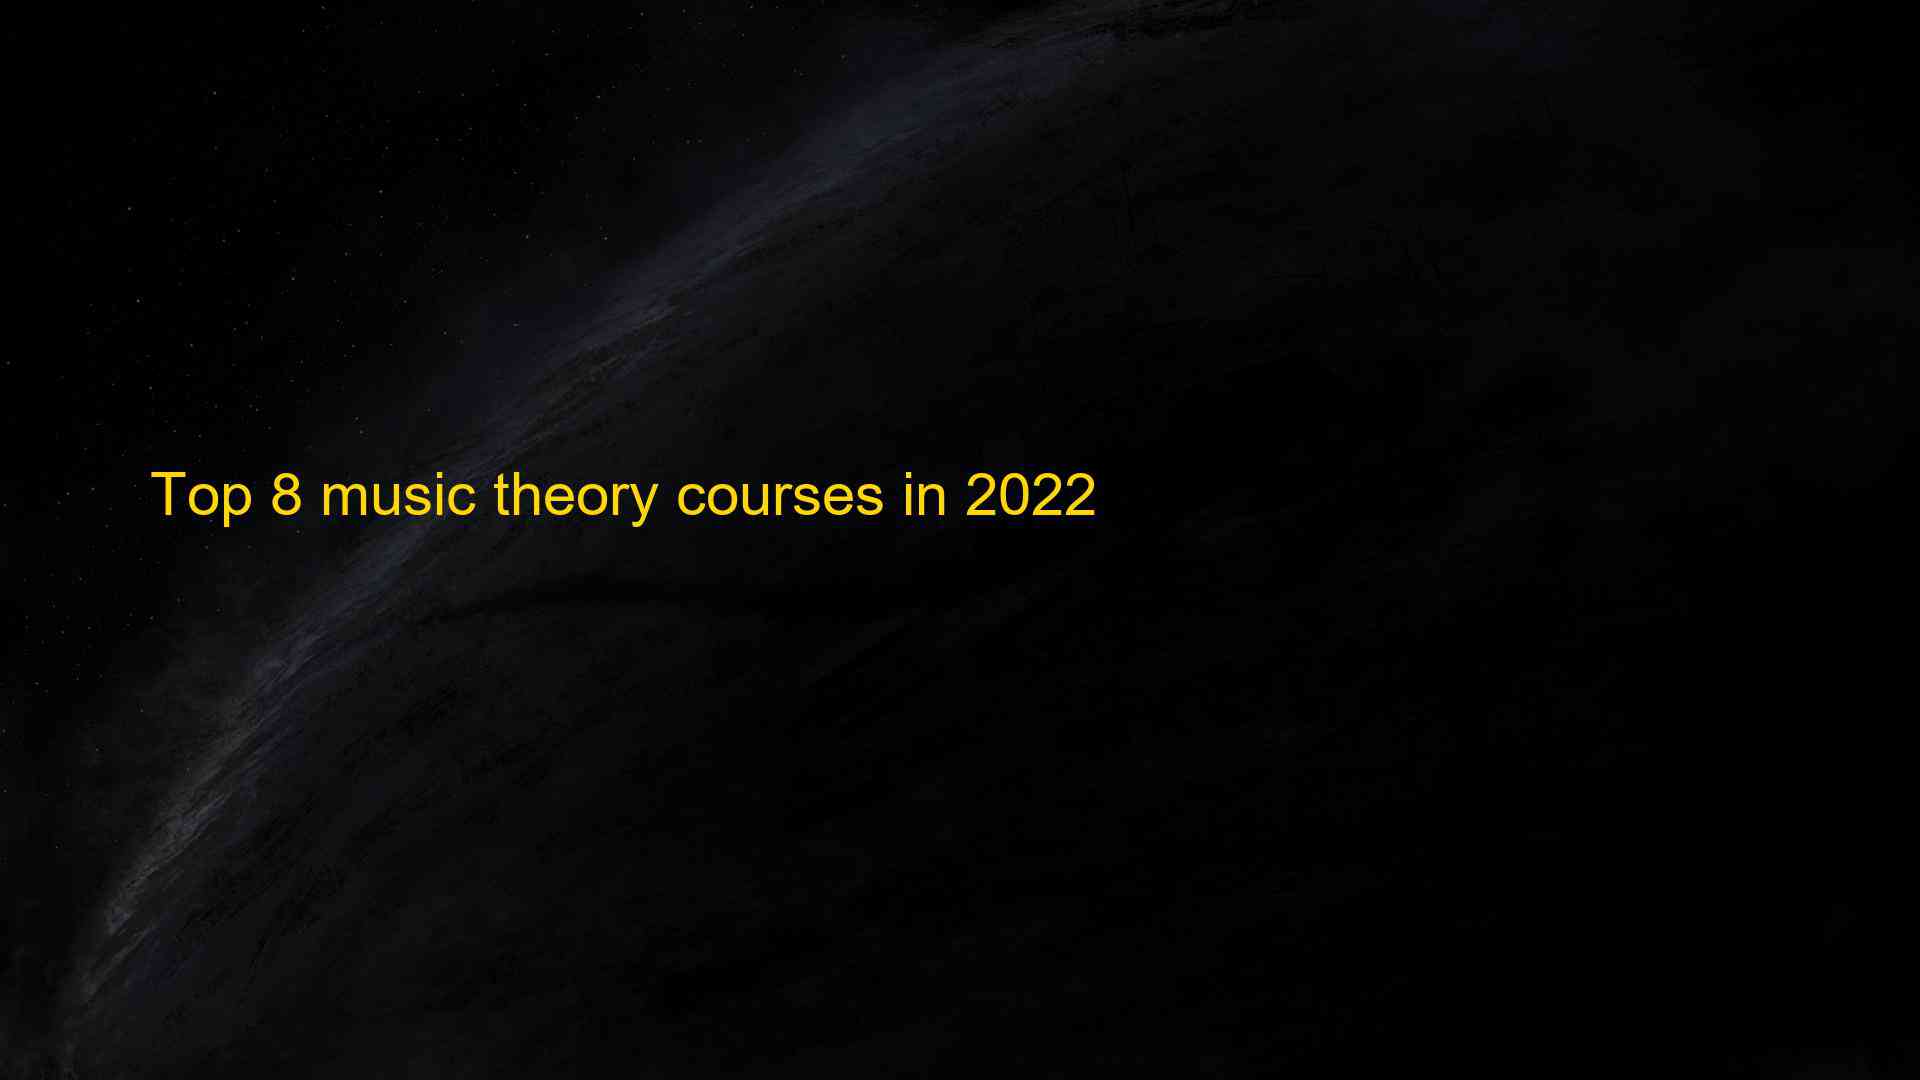 Top 8 music theory courses in 2022 1661939007